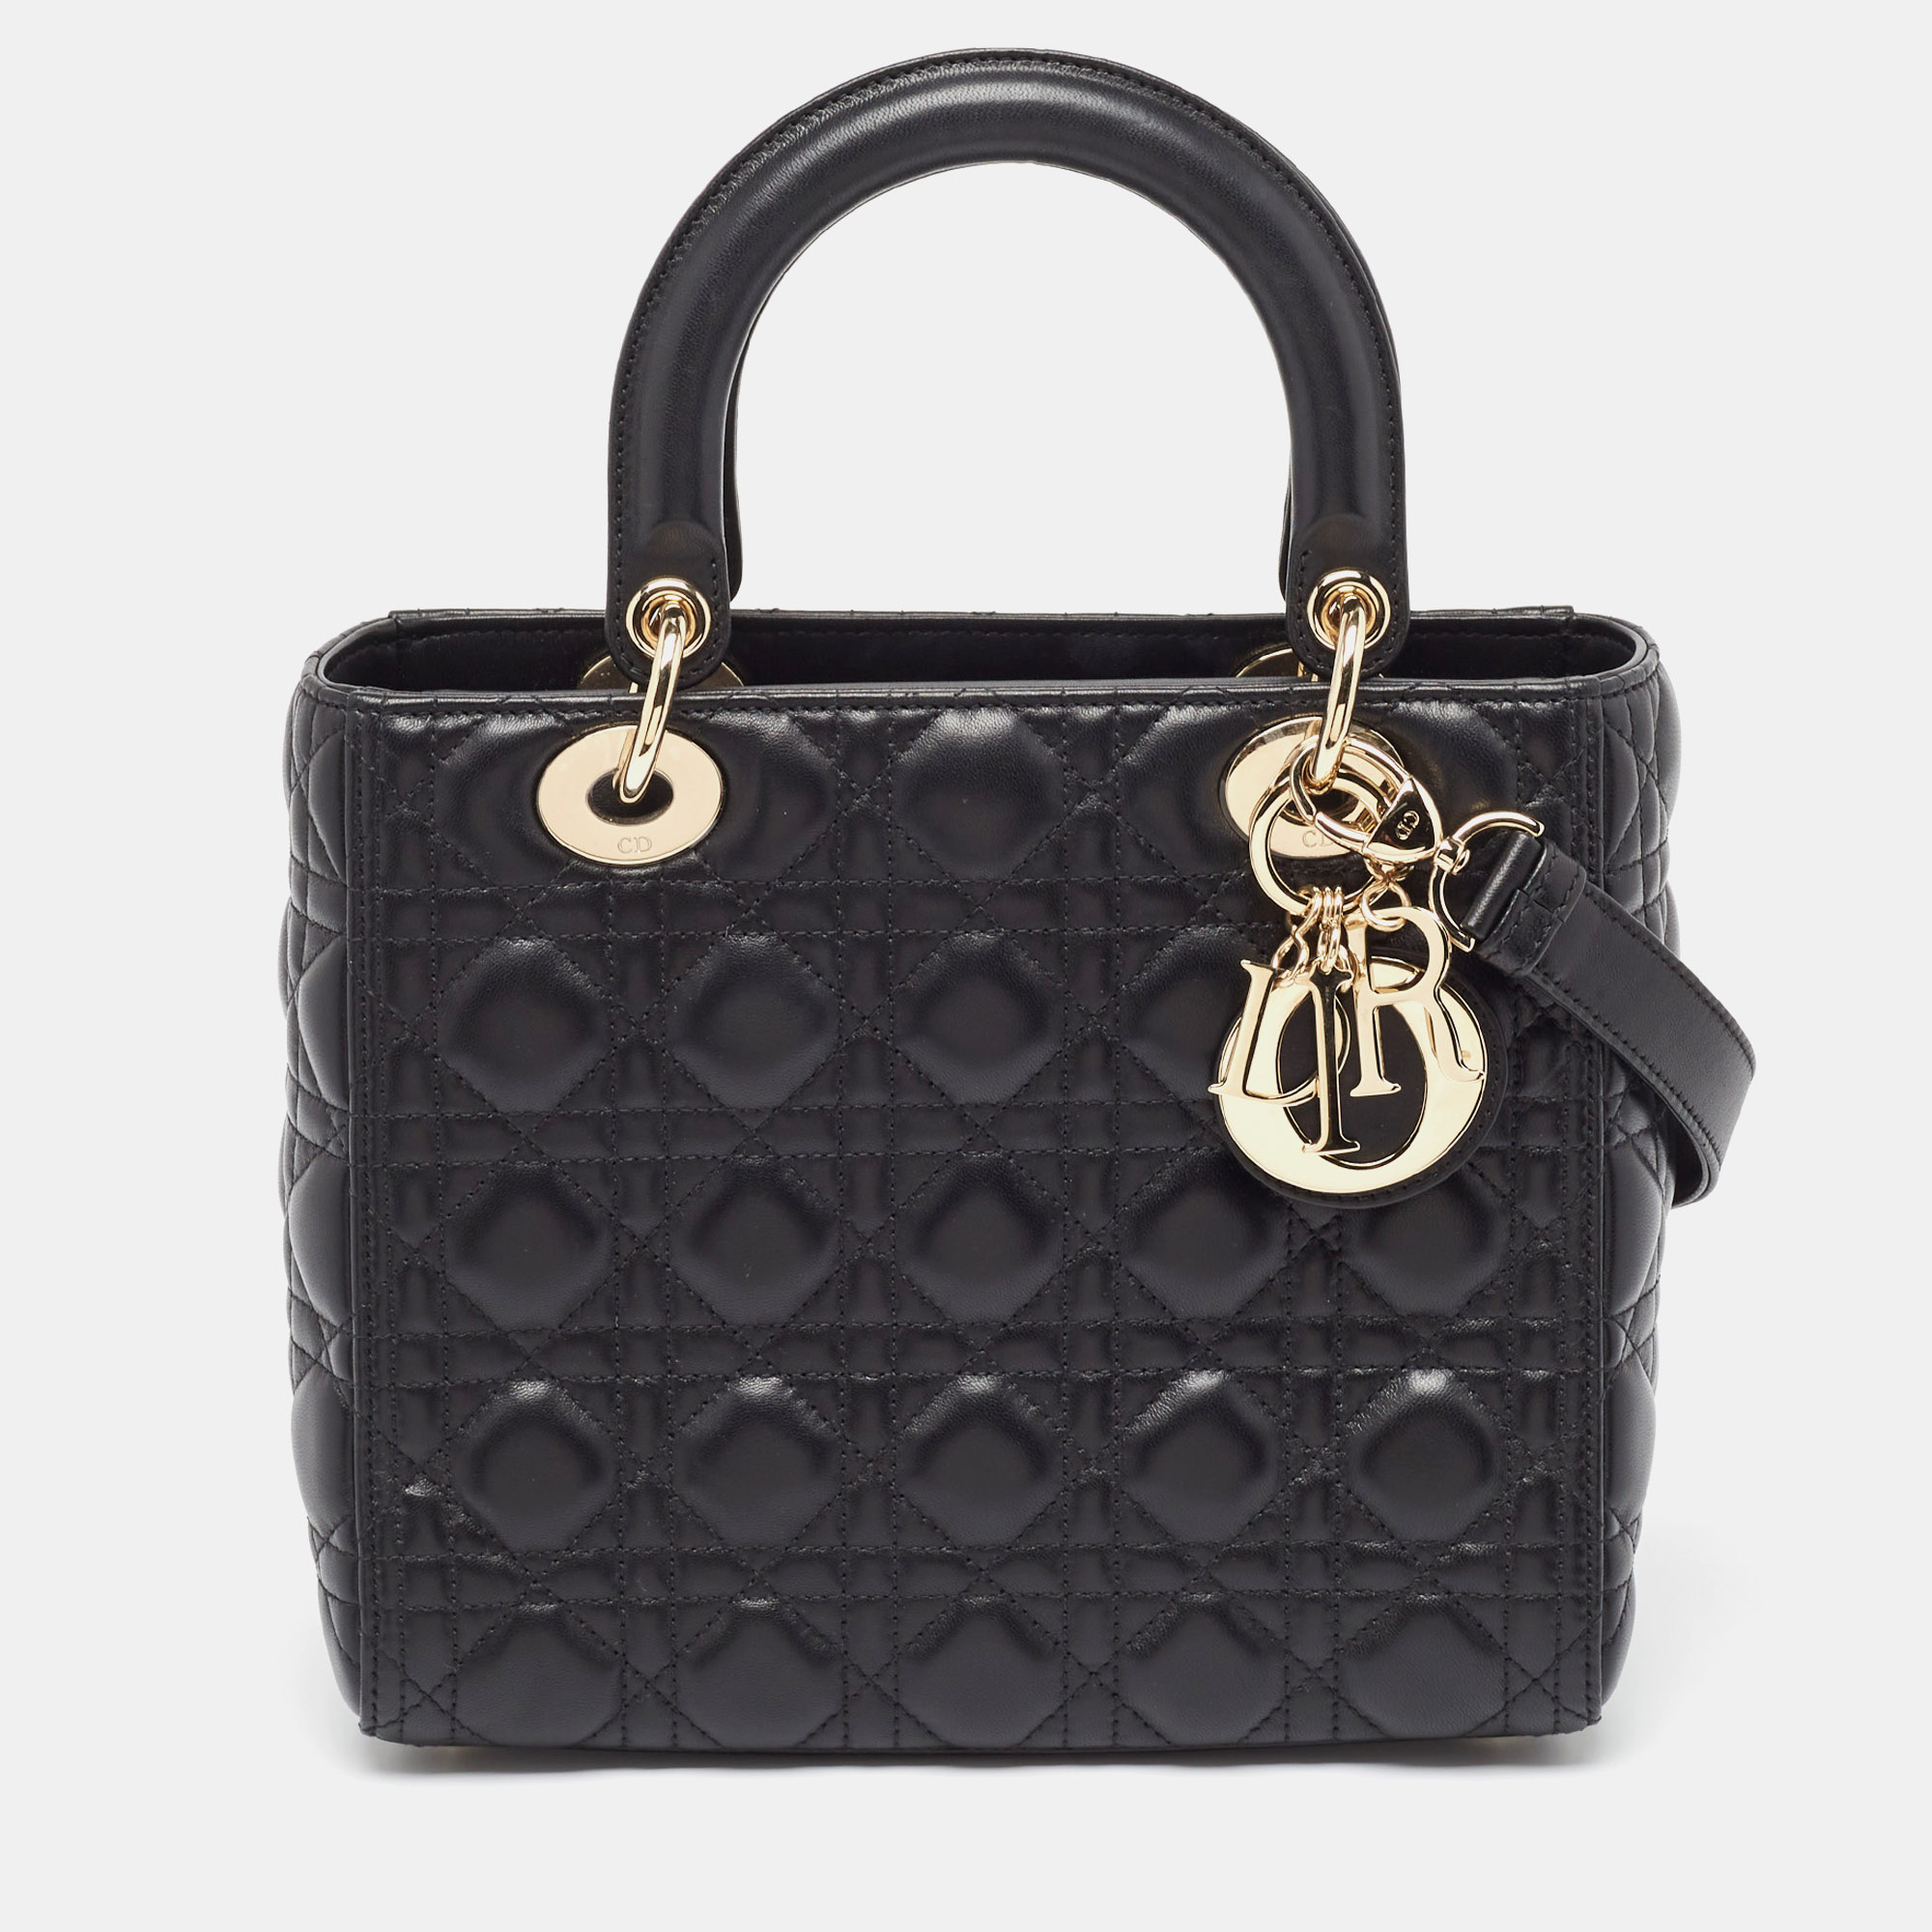 

Dior Black Cannage Leather  Lady Dior Tote